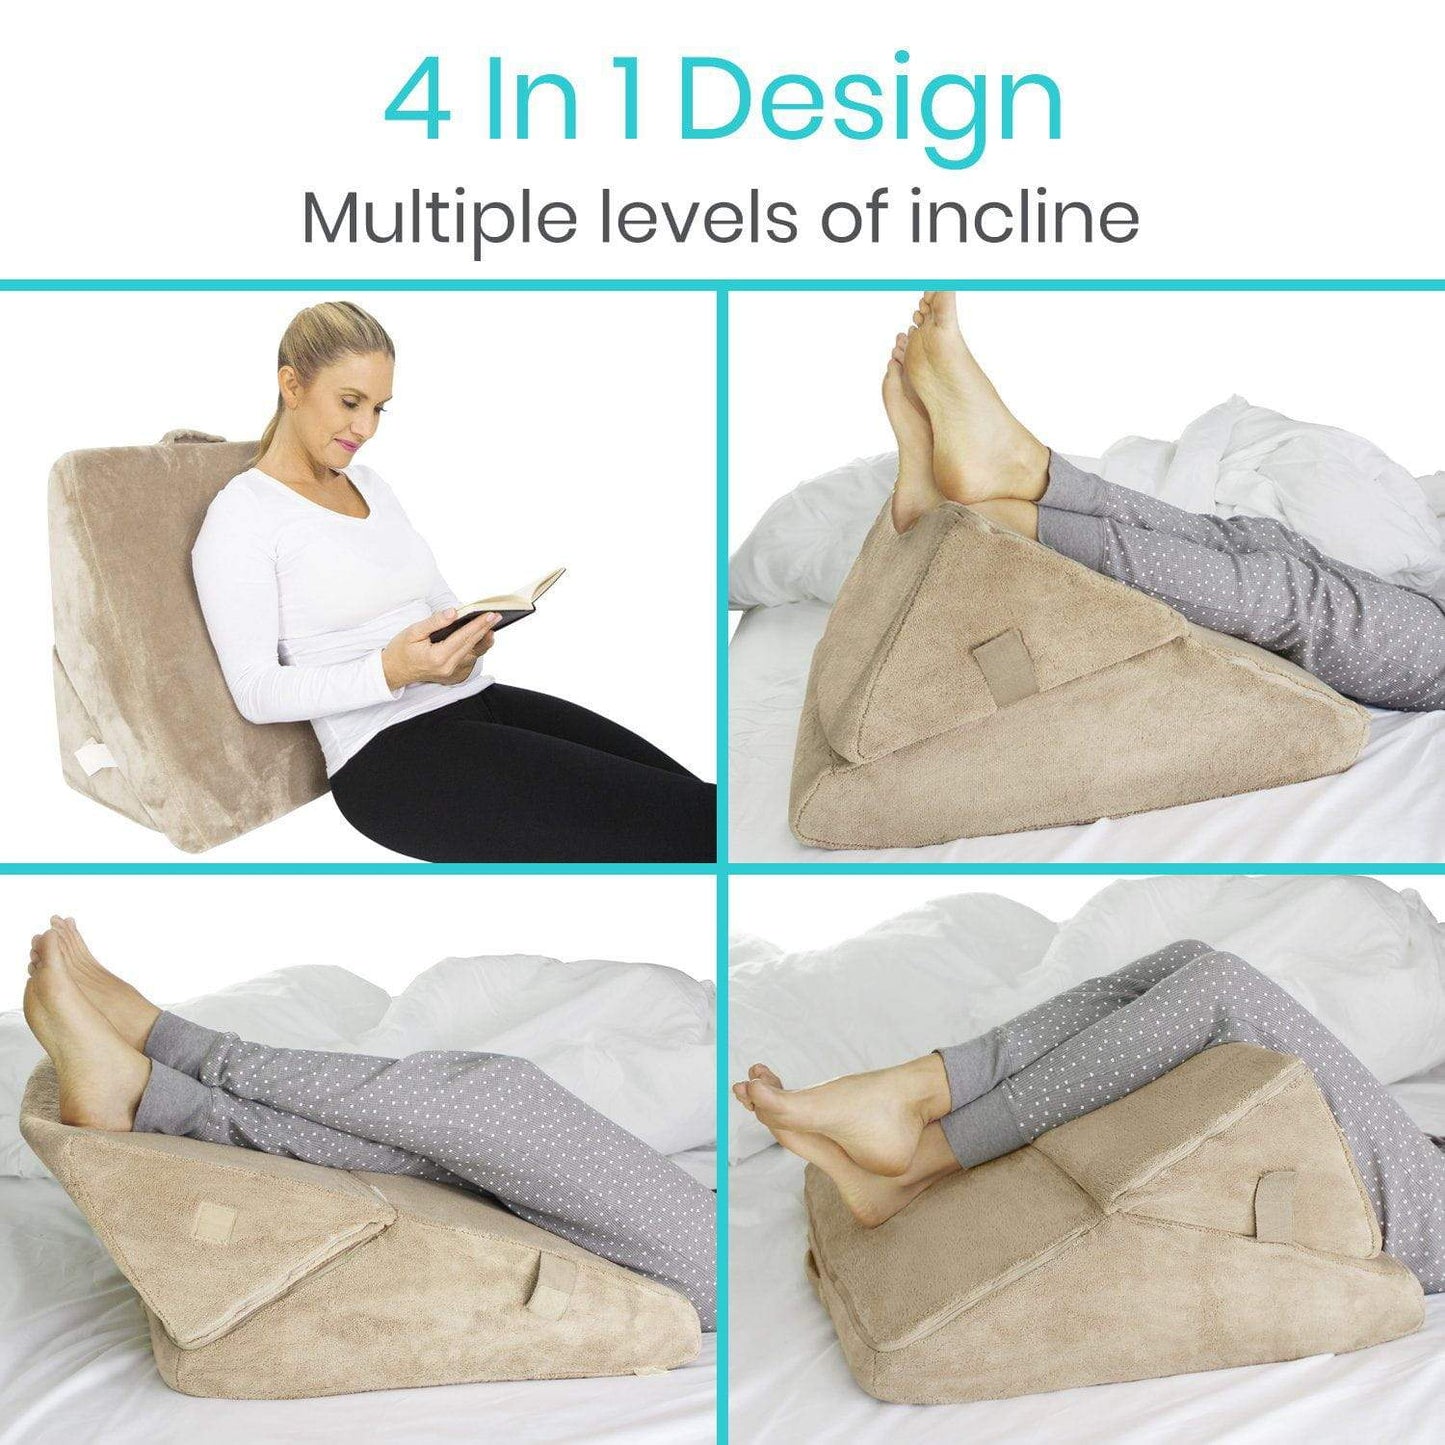 4 in 1 Bed Wedge for Better Breathing and Elevation being used in various incline positions from AskSAMIE